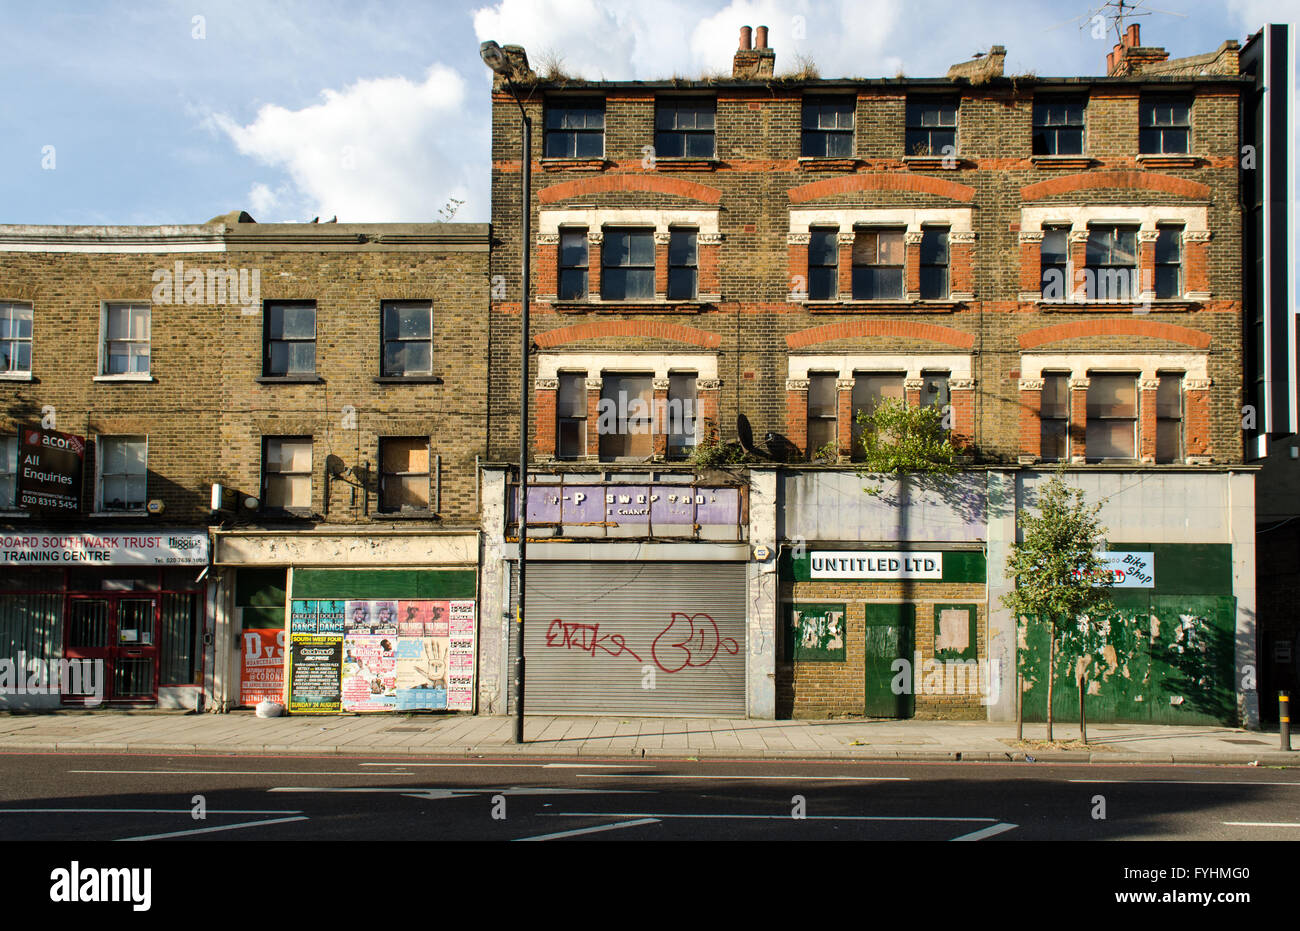 London, England - July 9, 2014: Decaying buildings on the Old Kent Road, a redevelopment opportunity area in inner London. Stock Photo